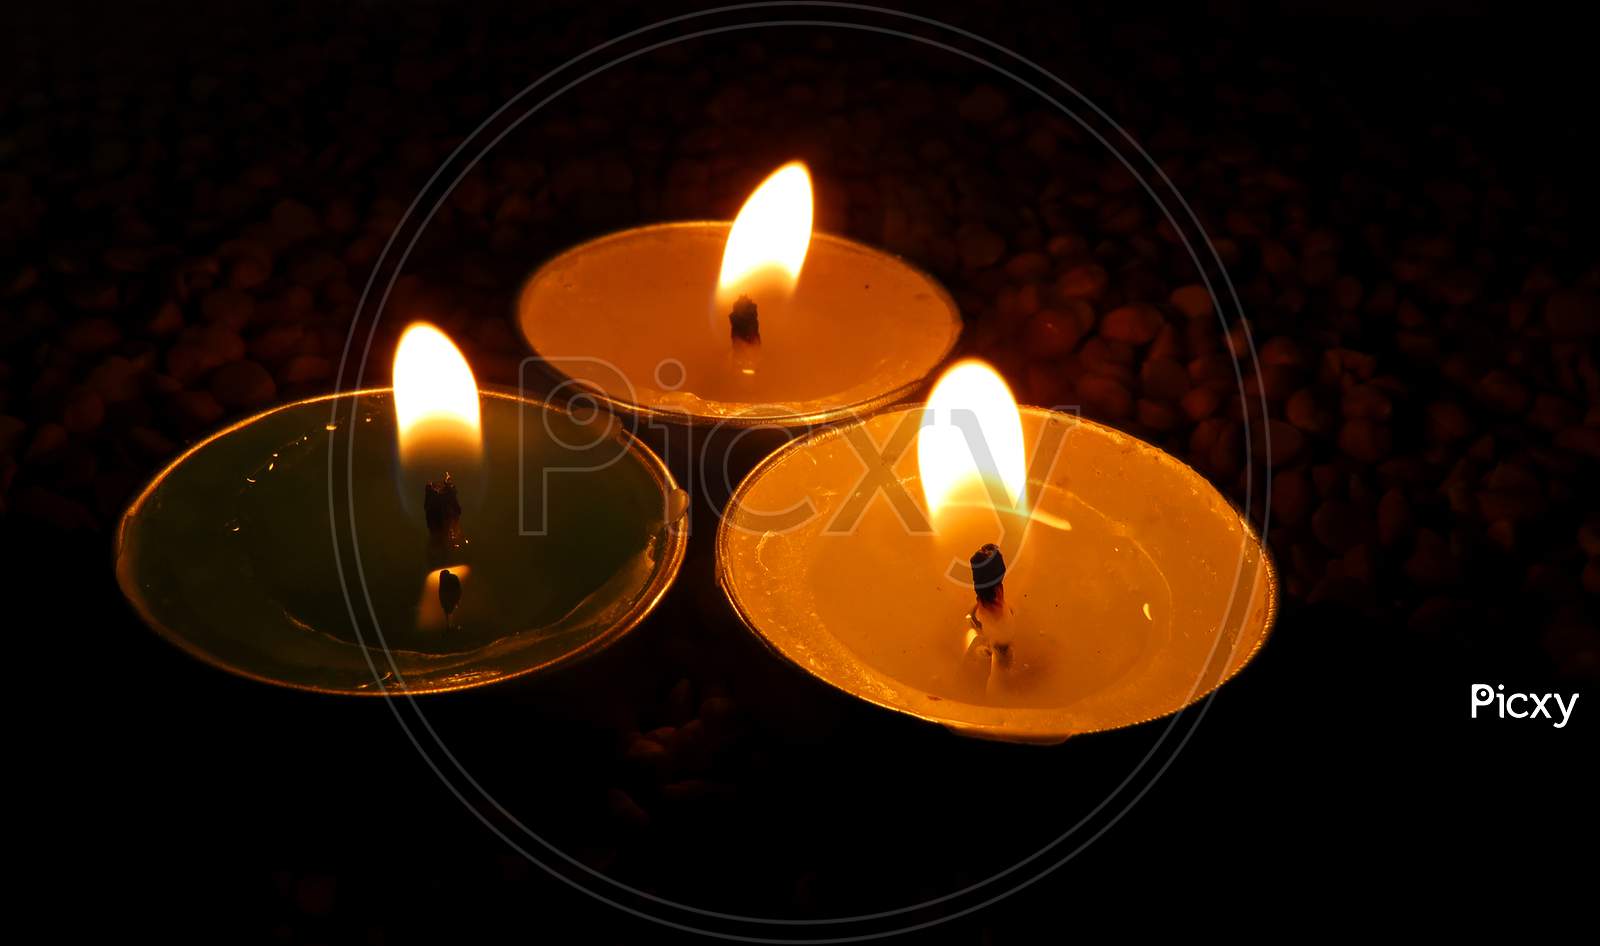 Candles on Split pea background,Isolated Green,Yellow And White candles on the seeds,Burning Candles.isolated temple candles.